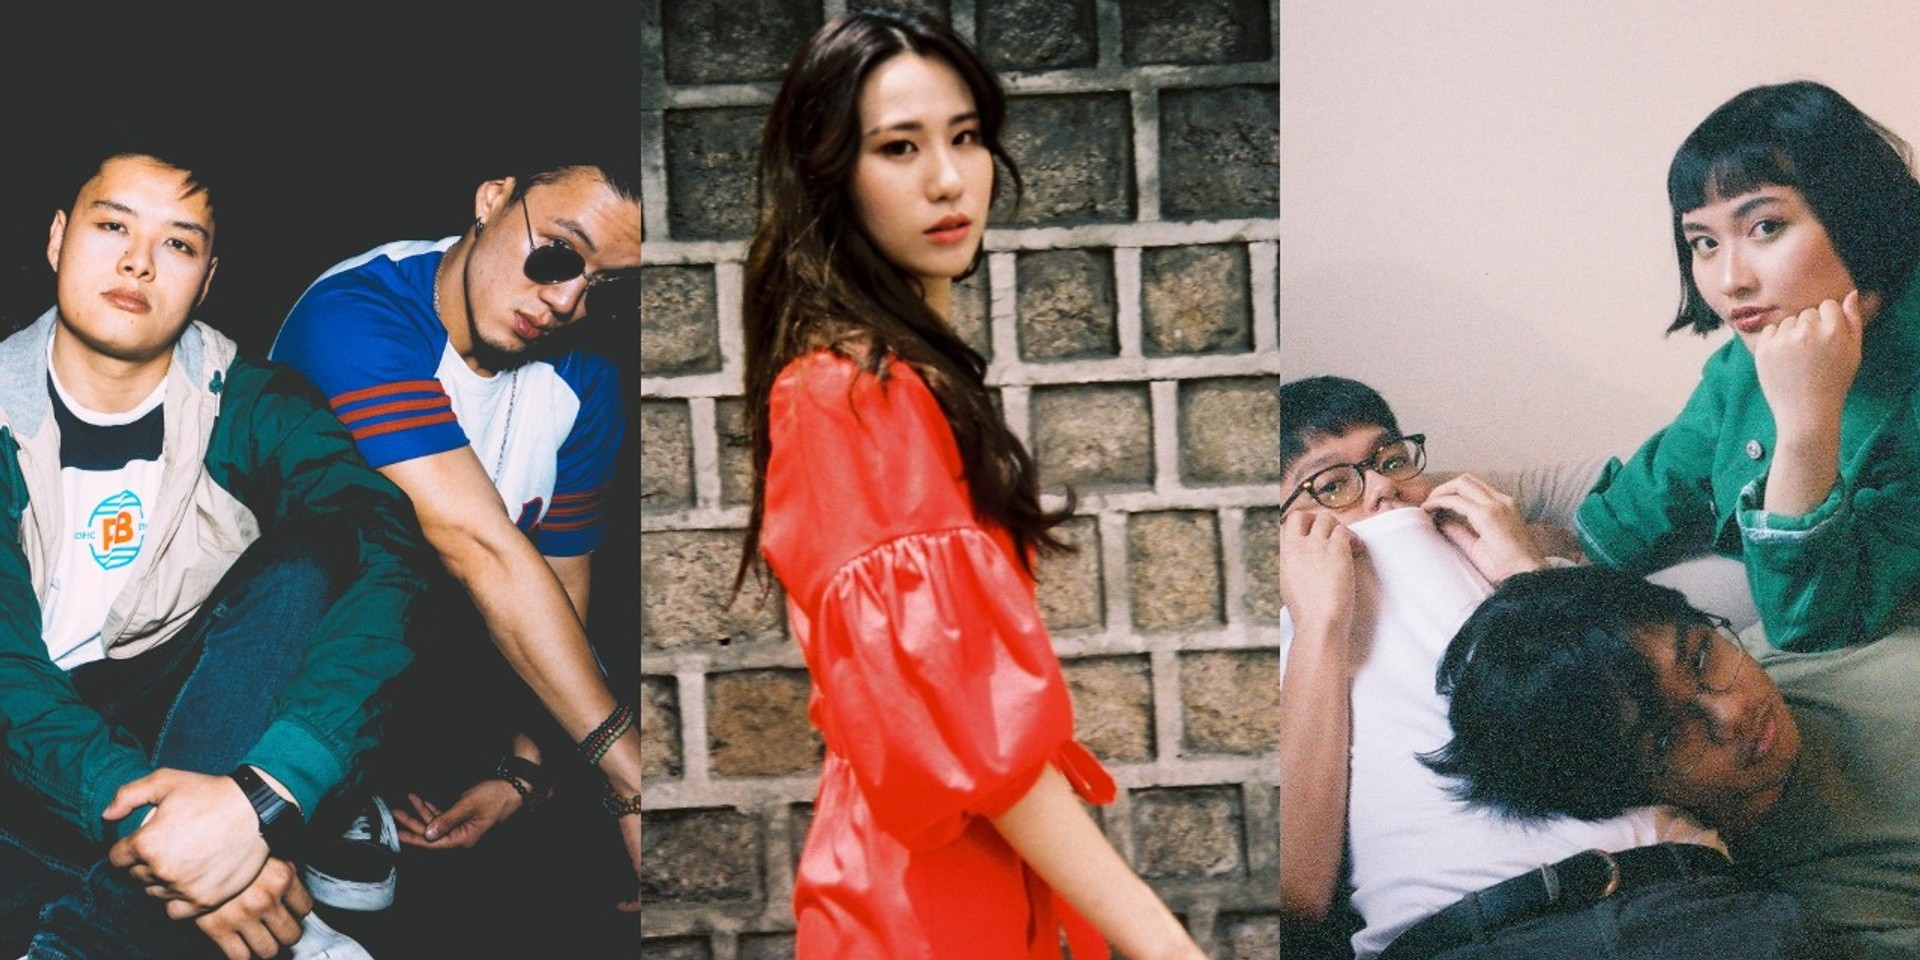 Hoody, Astronauts and Sobs to play at Marina Bay Sand's Open Stage this September